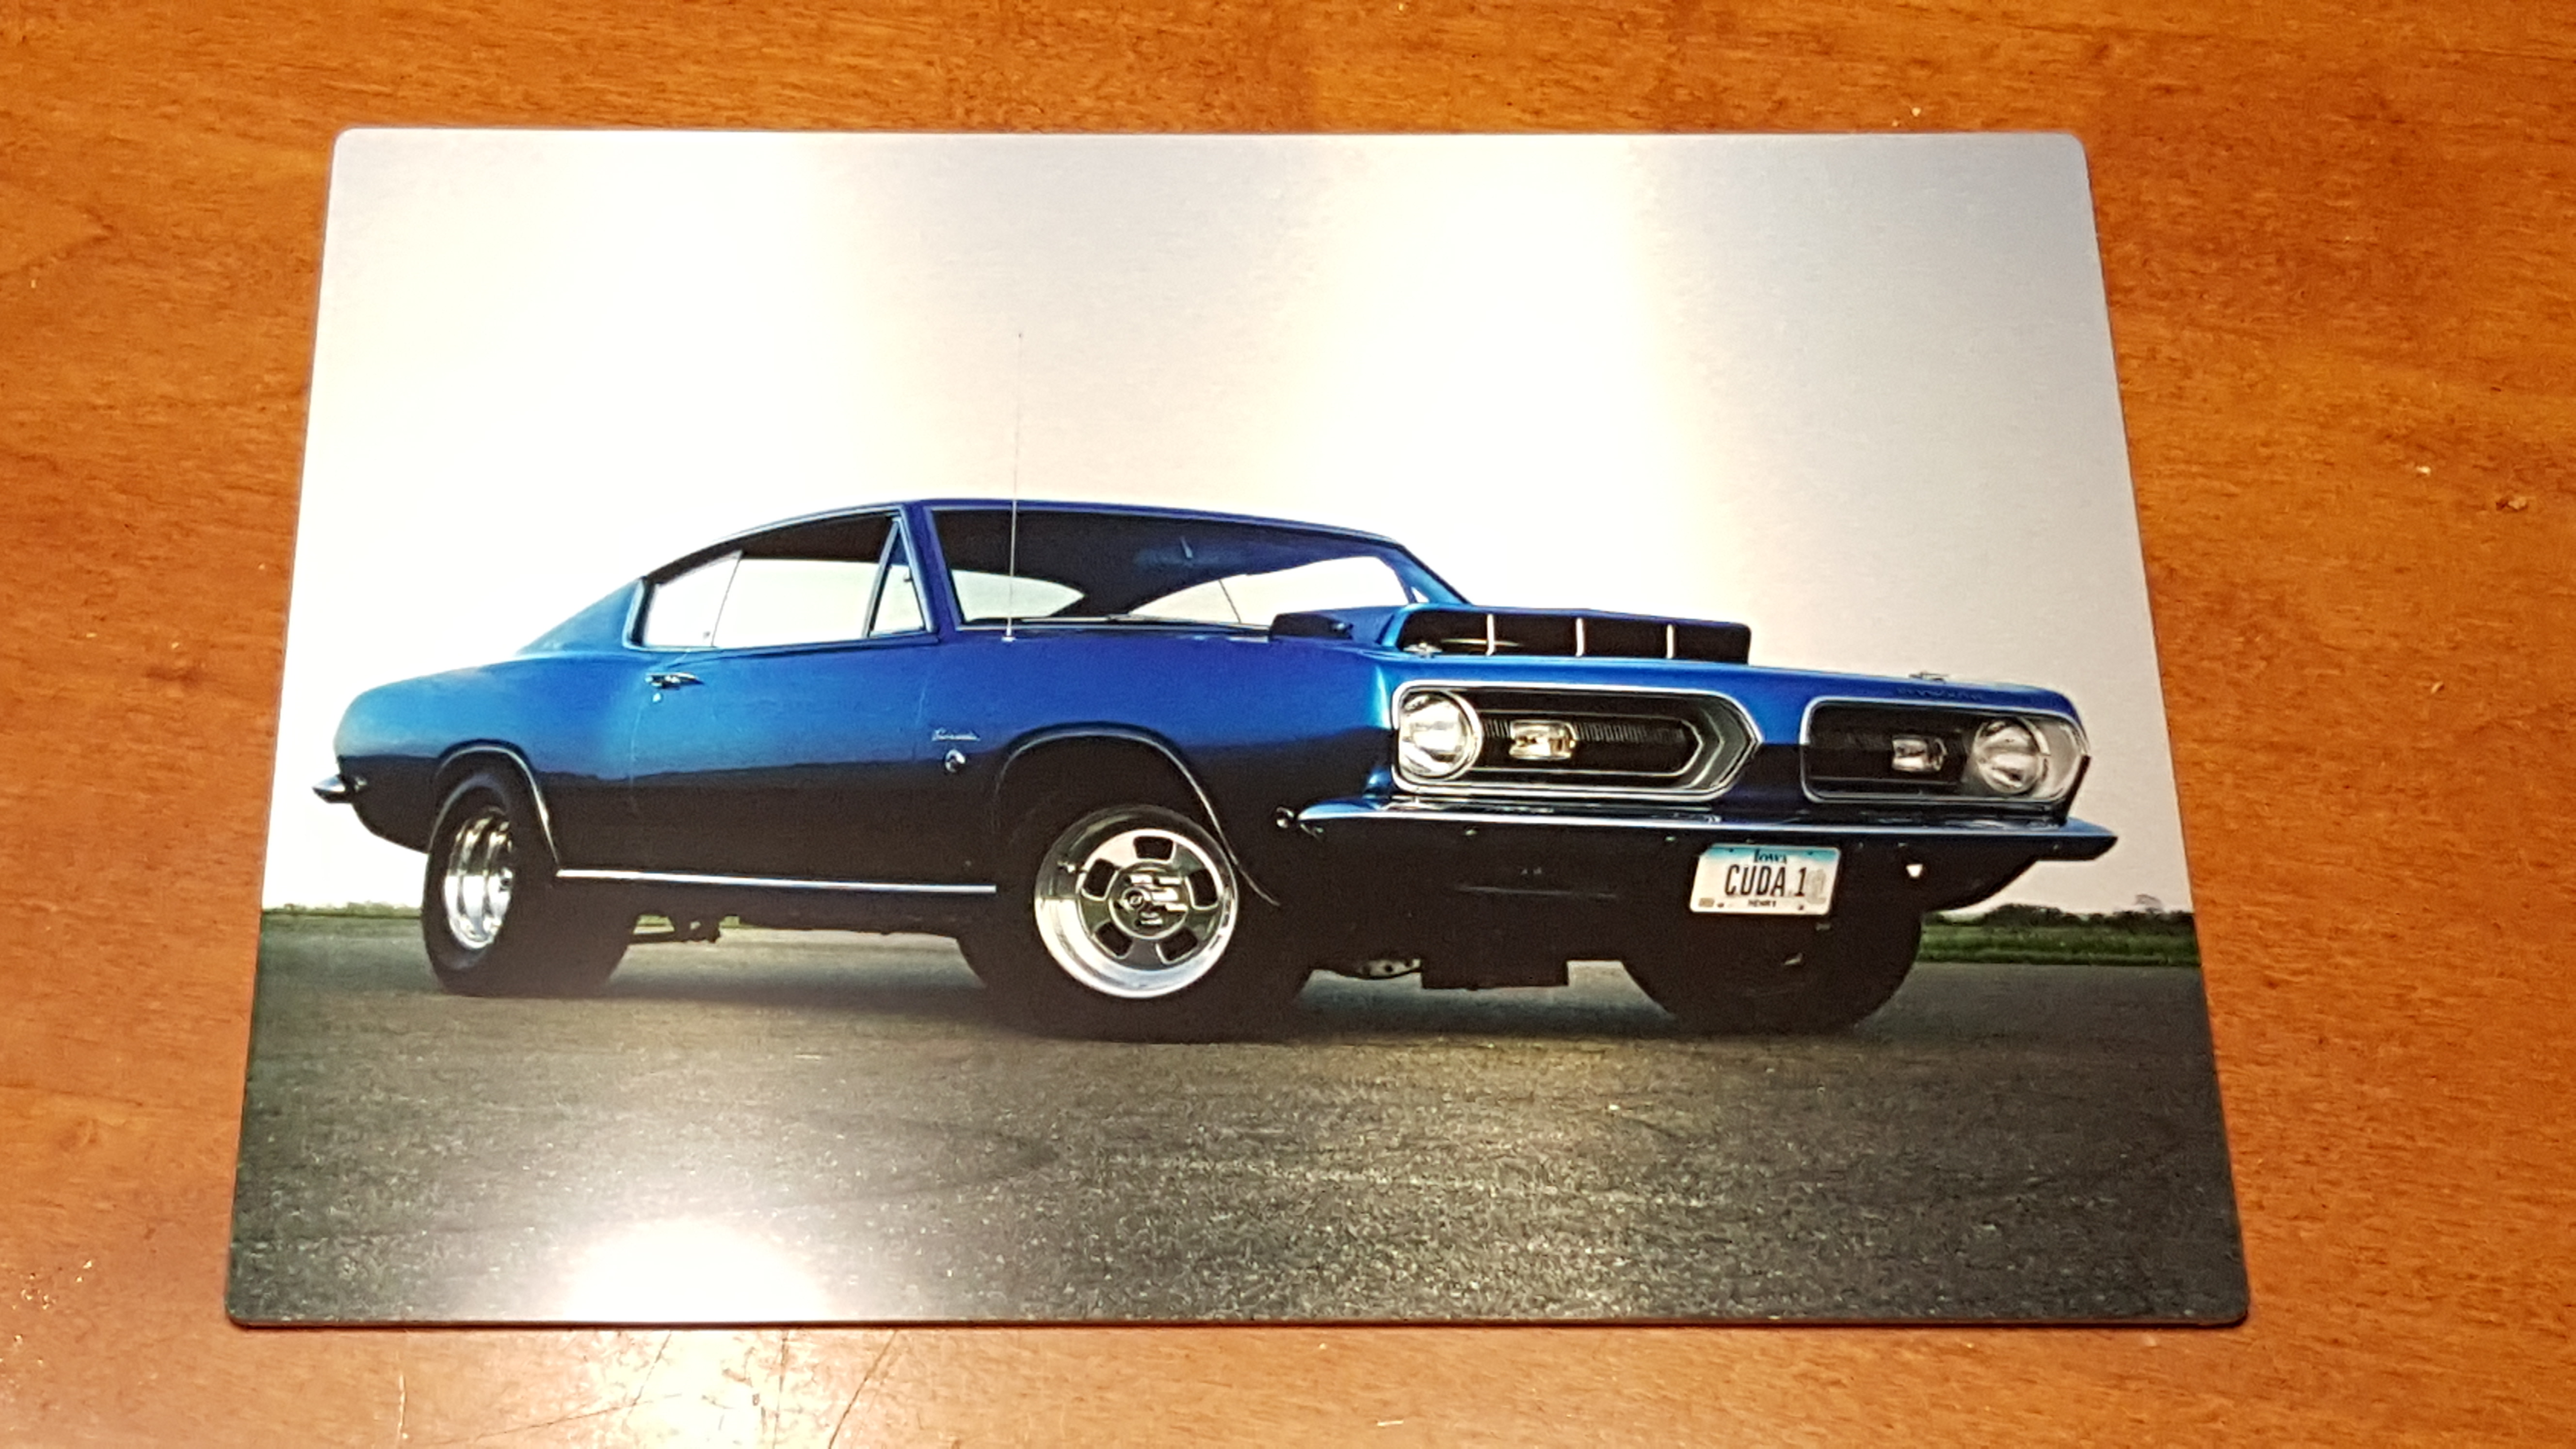 Aluminum Metal Print made with sublimation printing